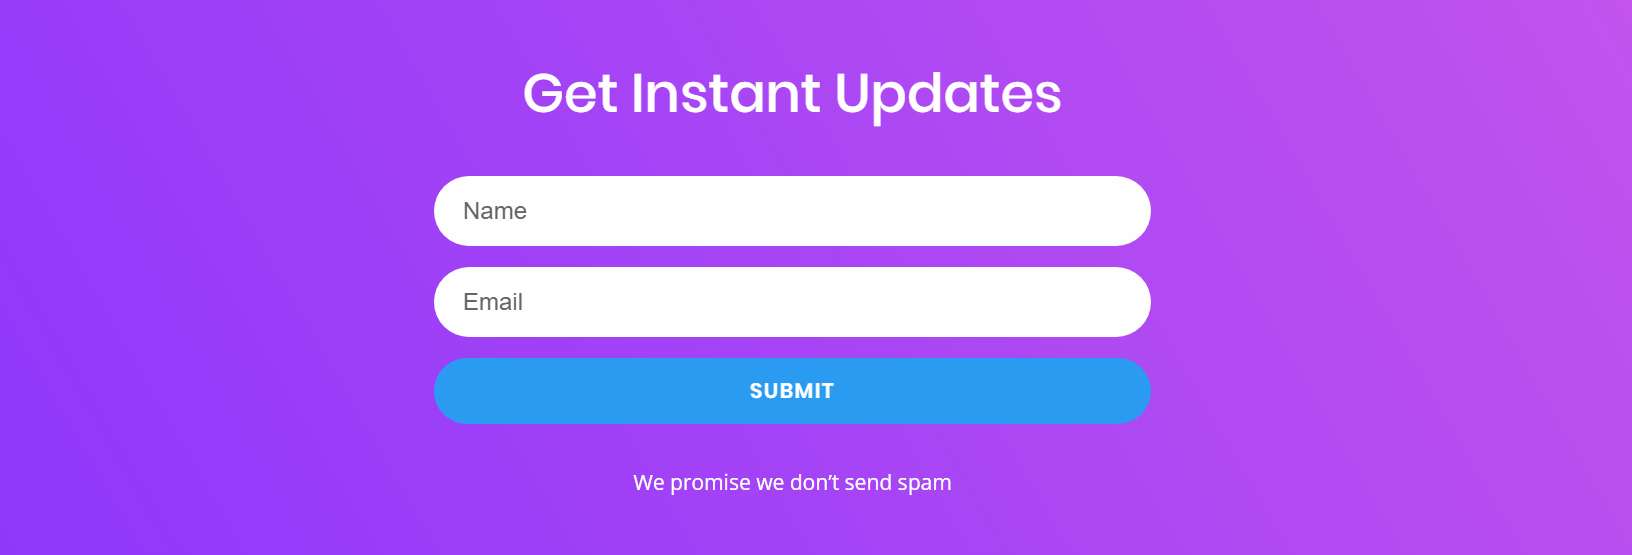 A Divi layout using a gradient background.